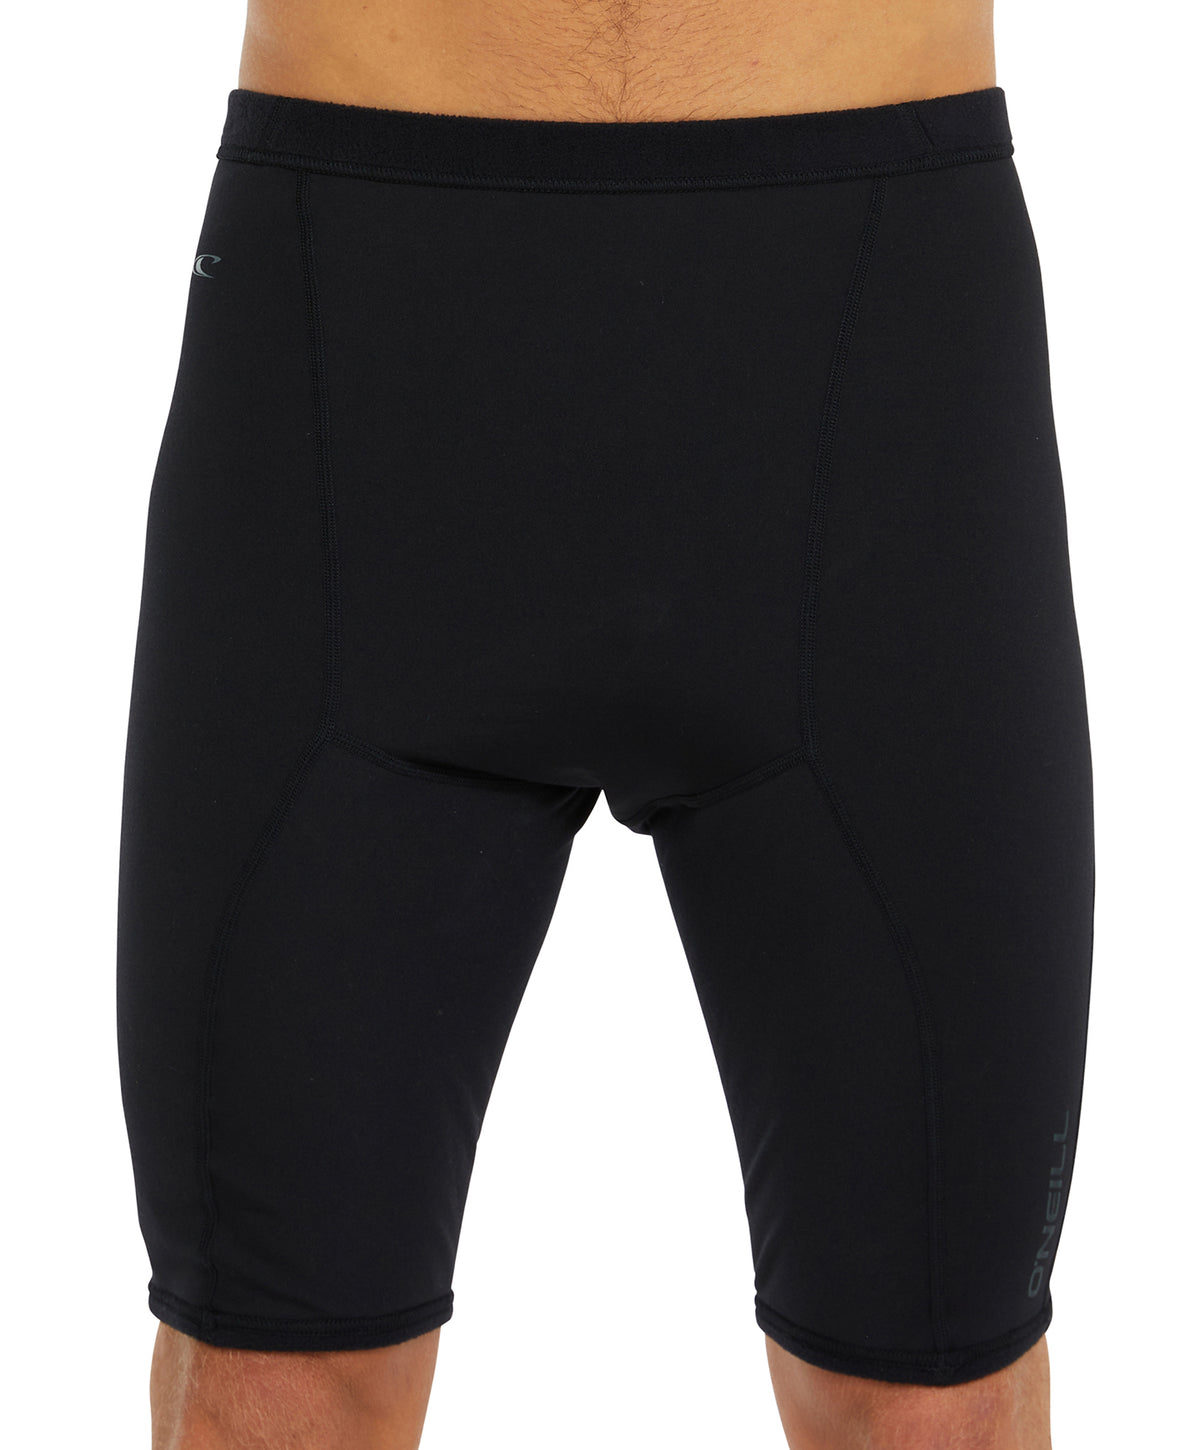 Mens Wetsuit Shorts | Buy Wetsuits & Clothing Online | O'Neill – O ...